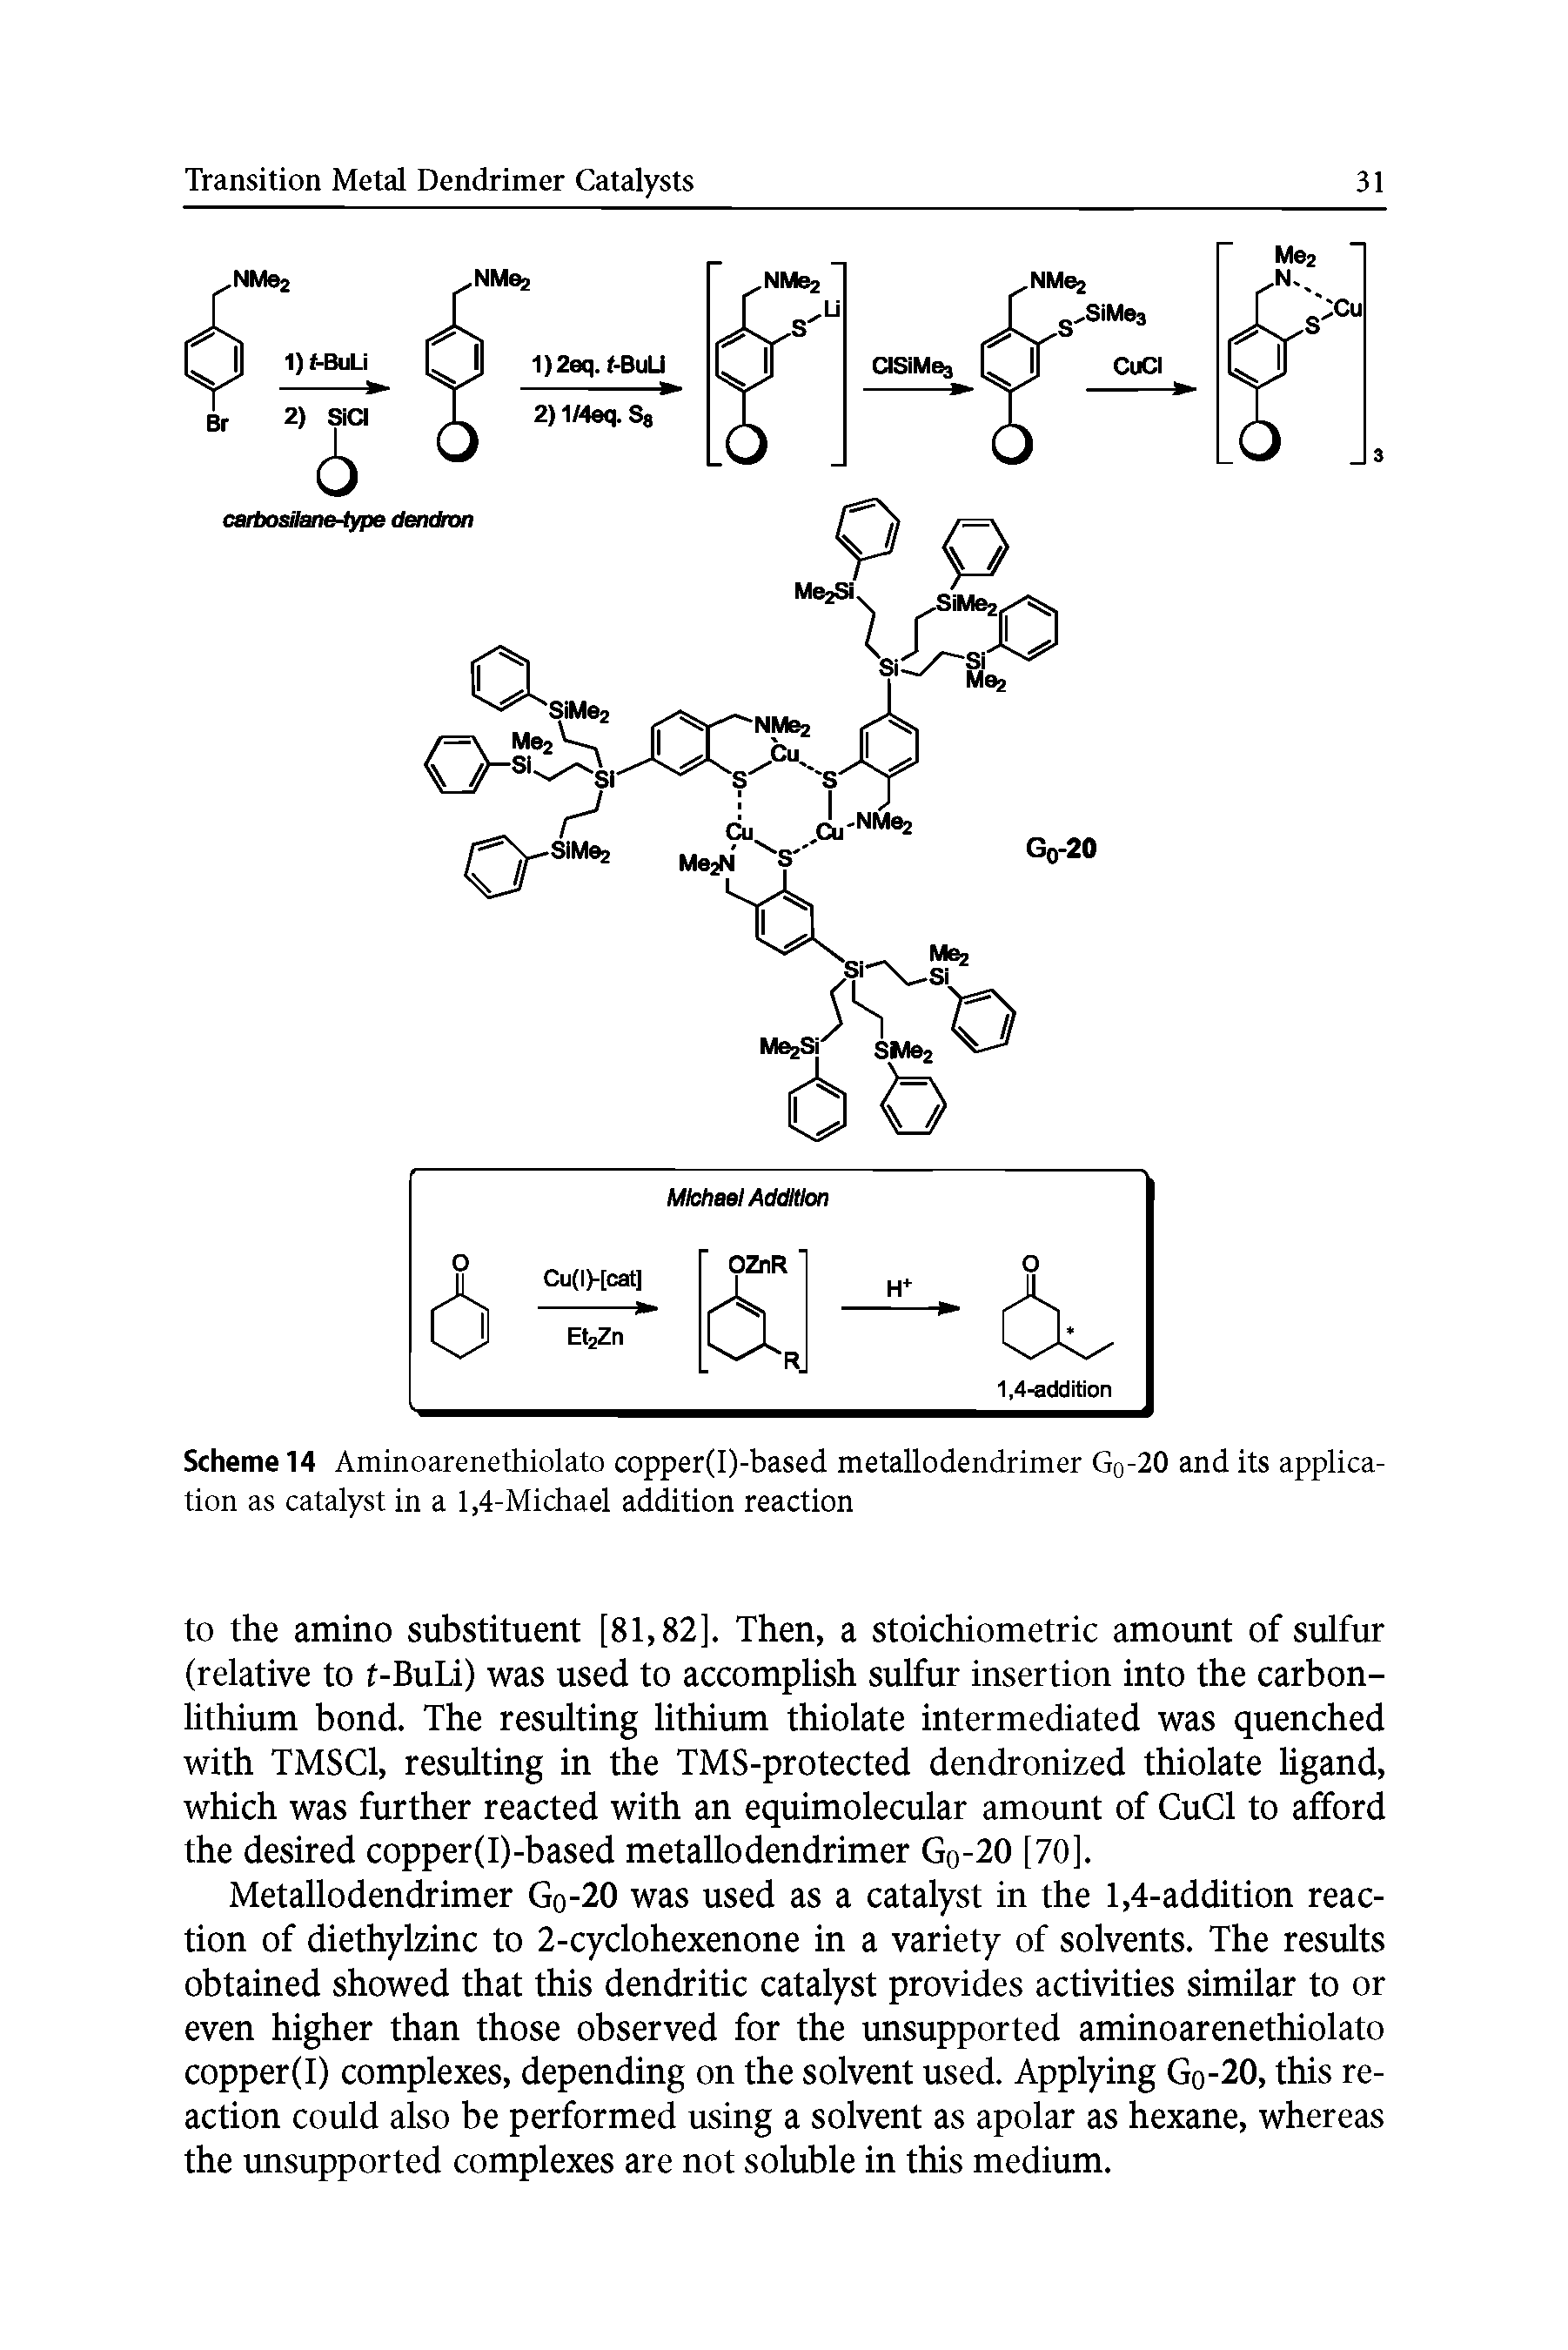 Scheme 14 Aminoarenethiolato copper(I)-based metallodendrimer G0-20 and its application as catalyst in a 1,4-Michael addition reaction...